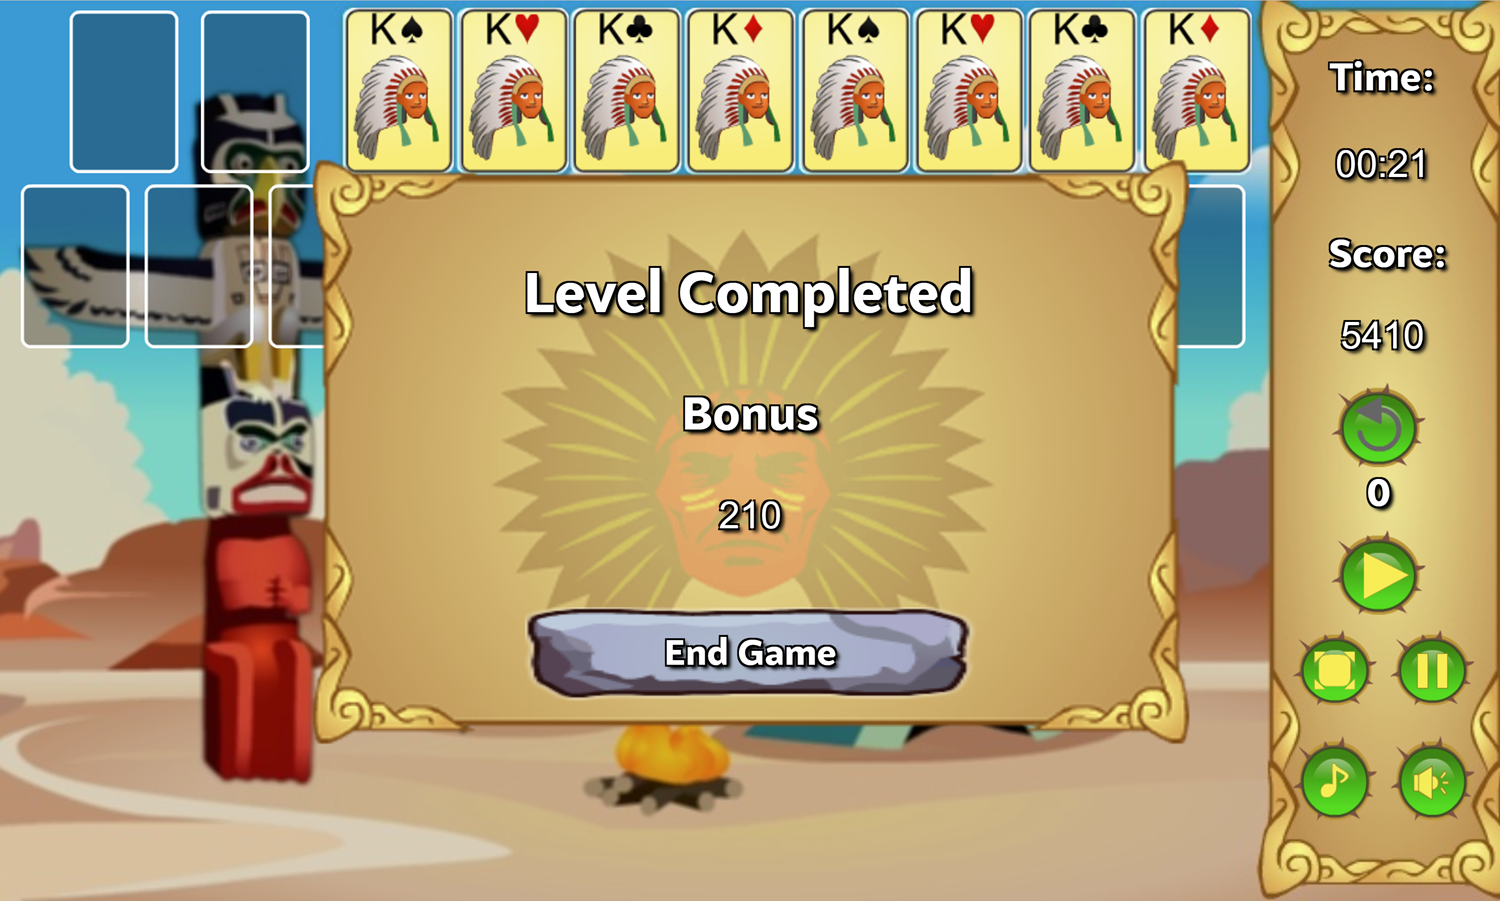 Indian Solitaire Game Level Completed Screen Screenshot.